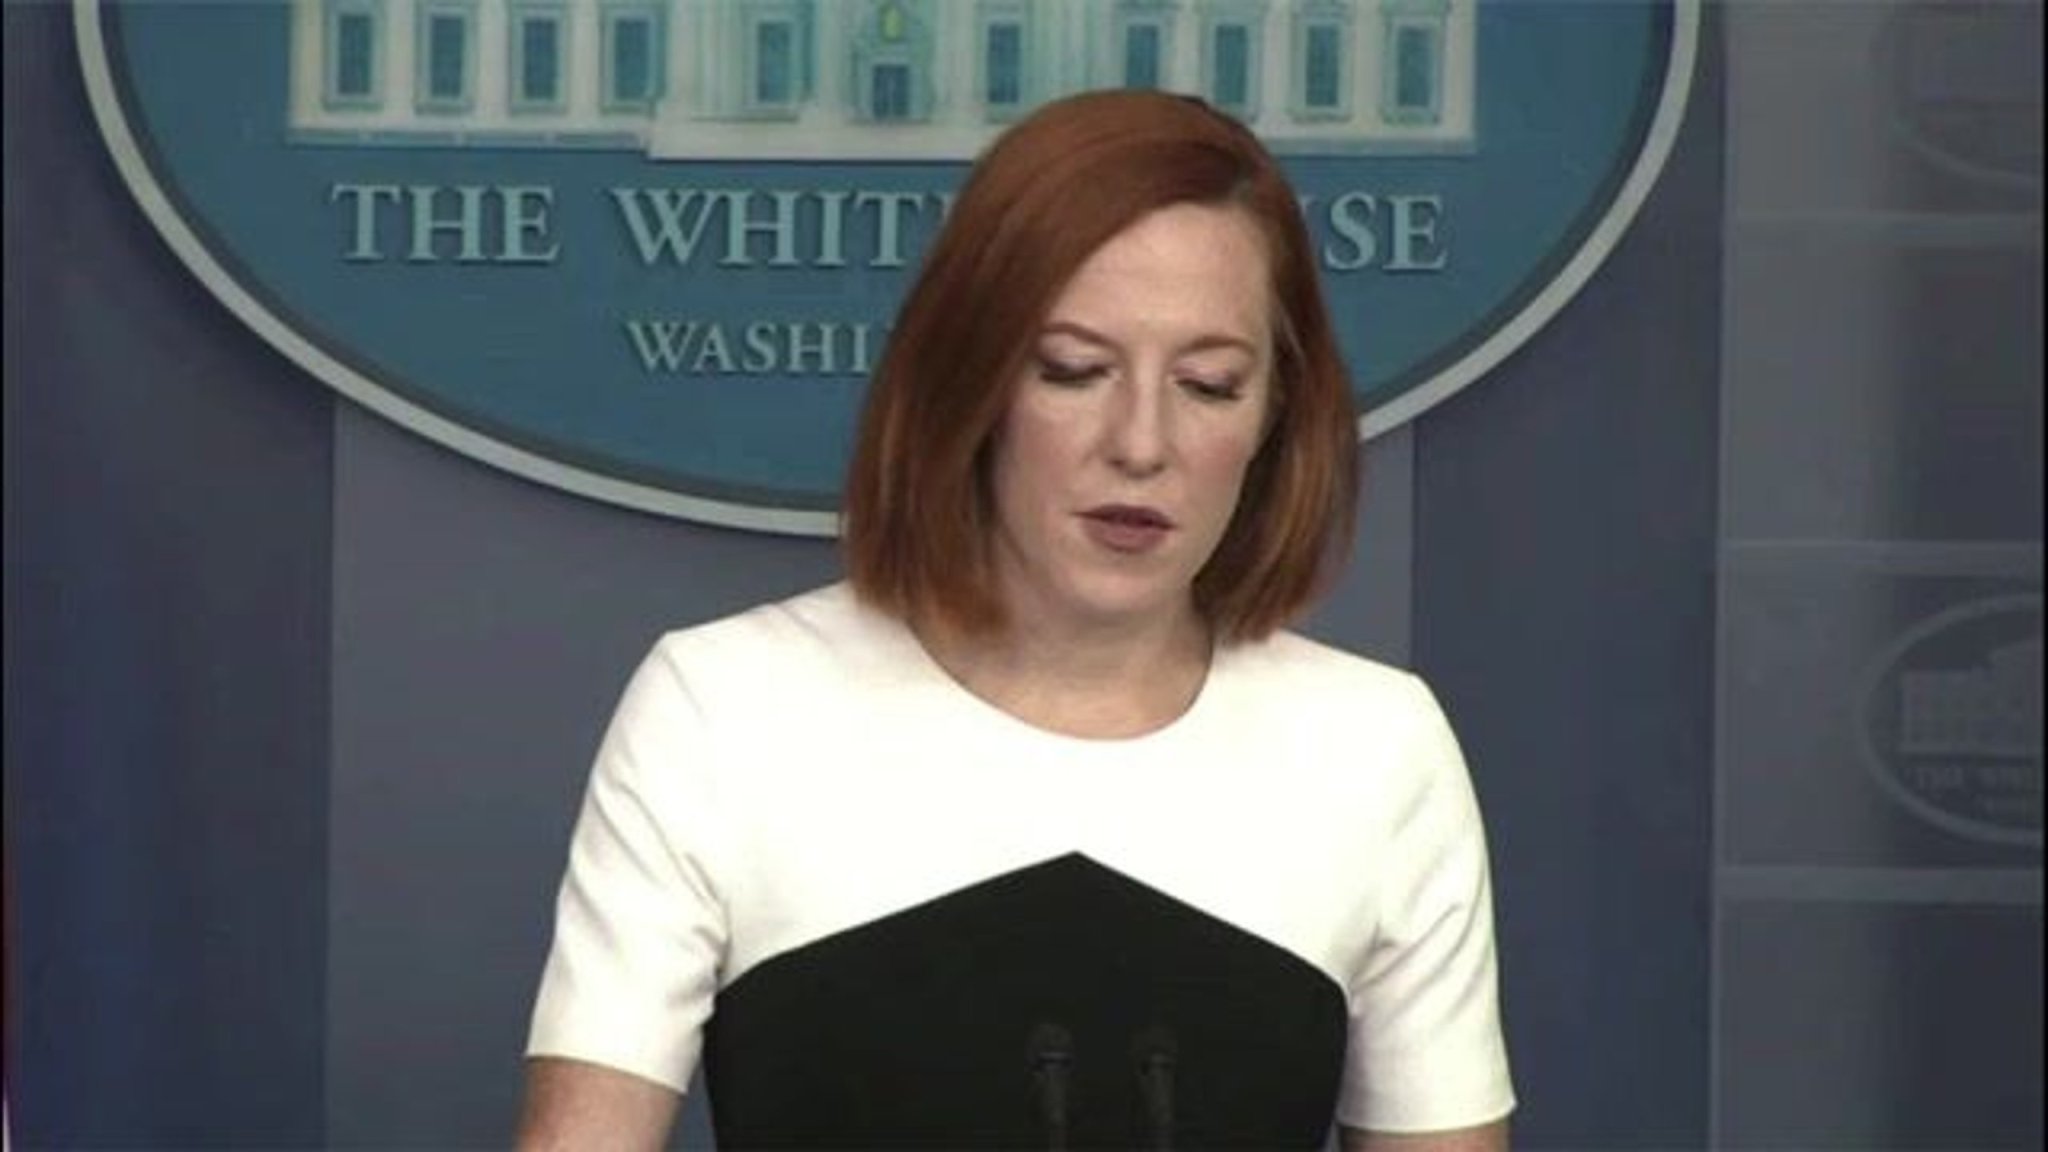 Psaki confirms a diplomatic boycott of Beijing Olympics, “given the PRC’s ongoing genocide and crimes against humanity.”